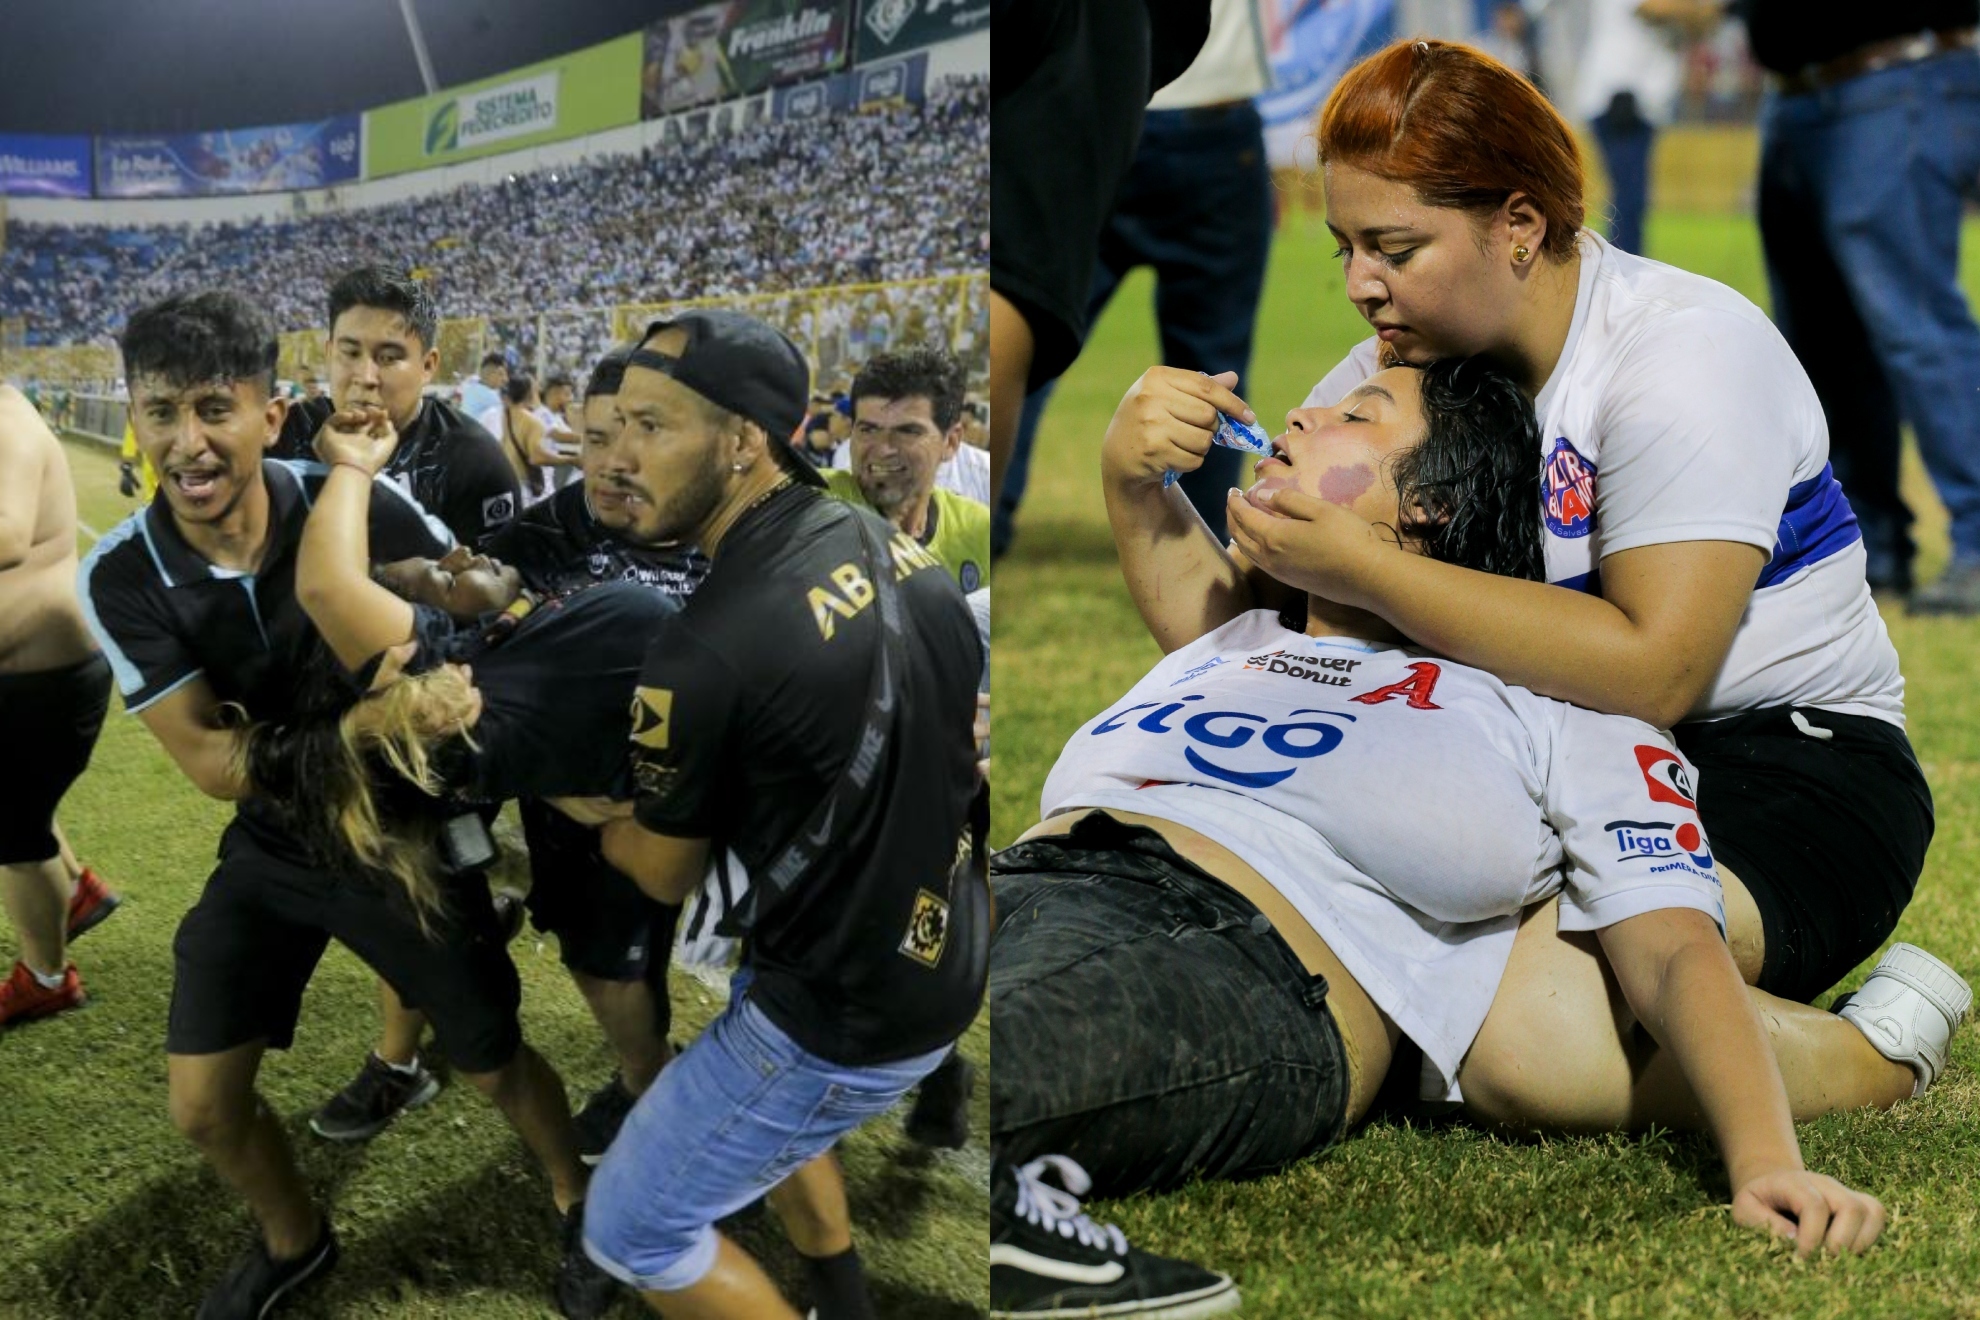 Images of a tragic night: This was the scene after the Alianza-FAS stampede in El Salvador